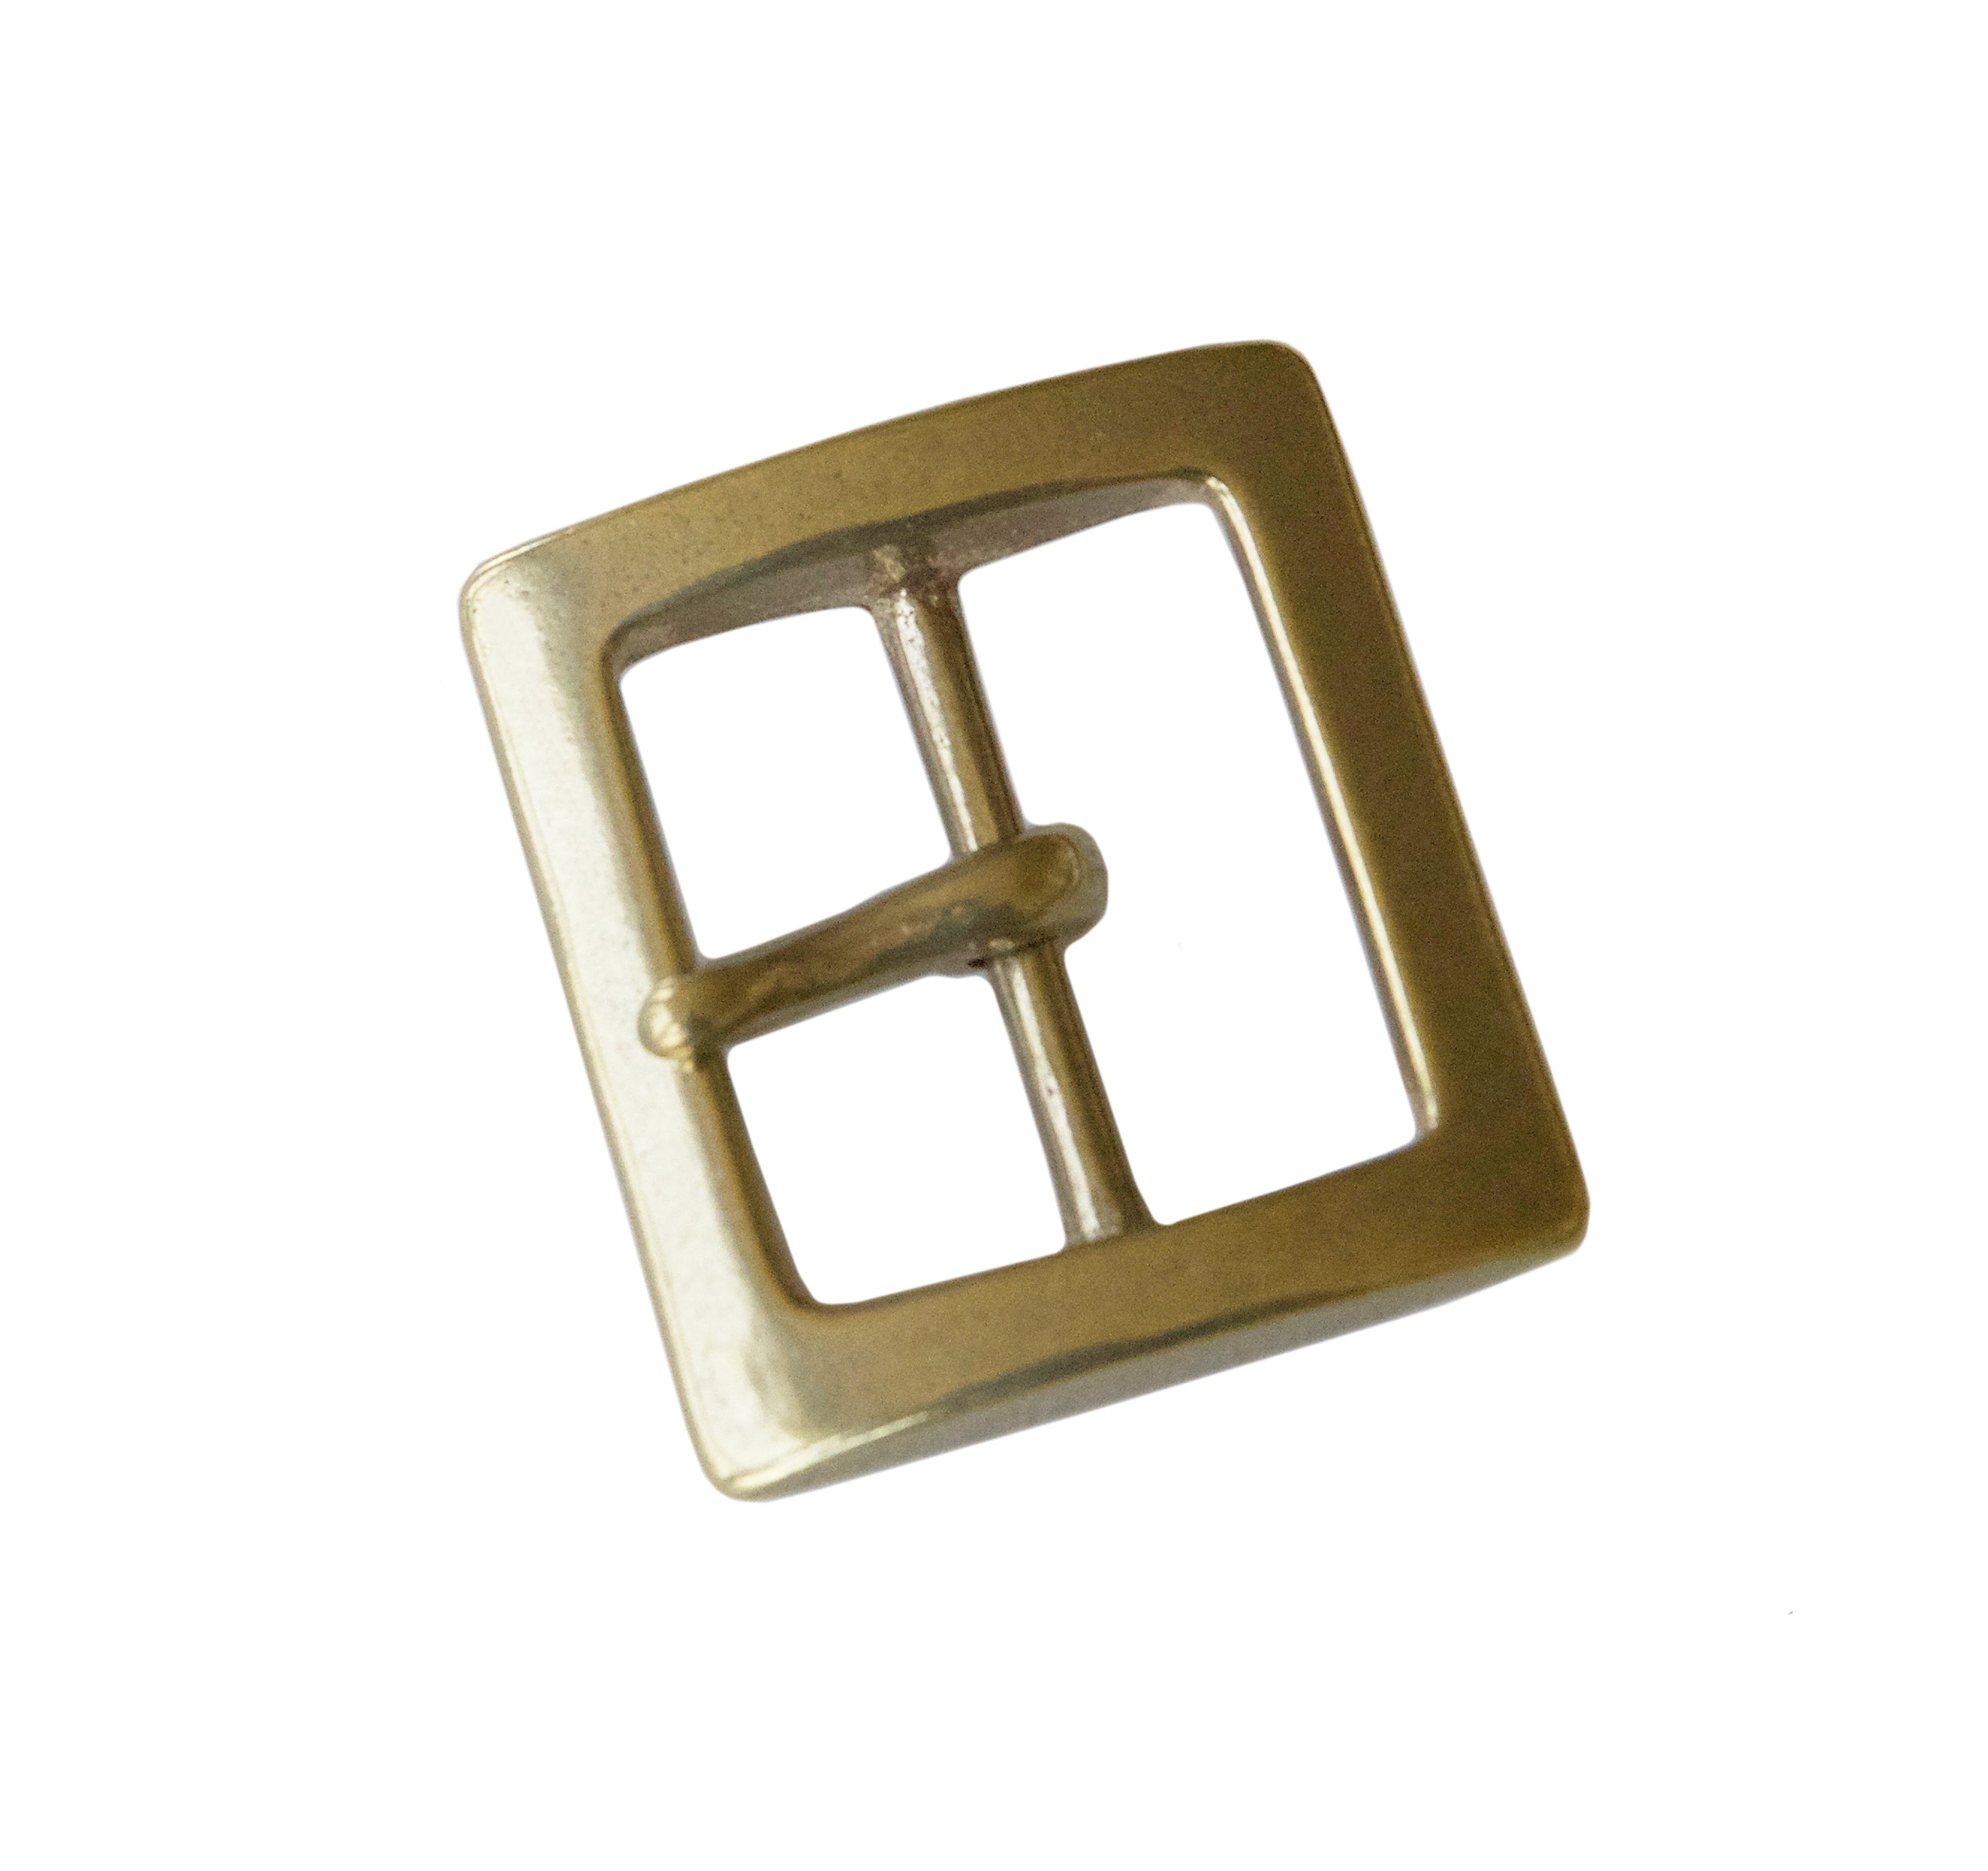 Gold Plated Belt Buckles, Square Luxury Buckles